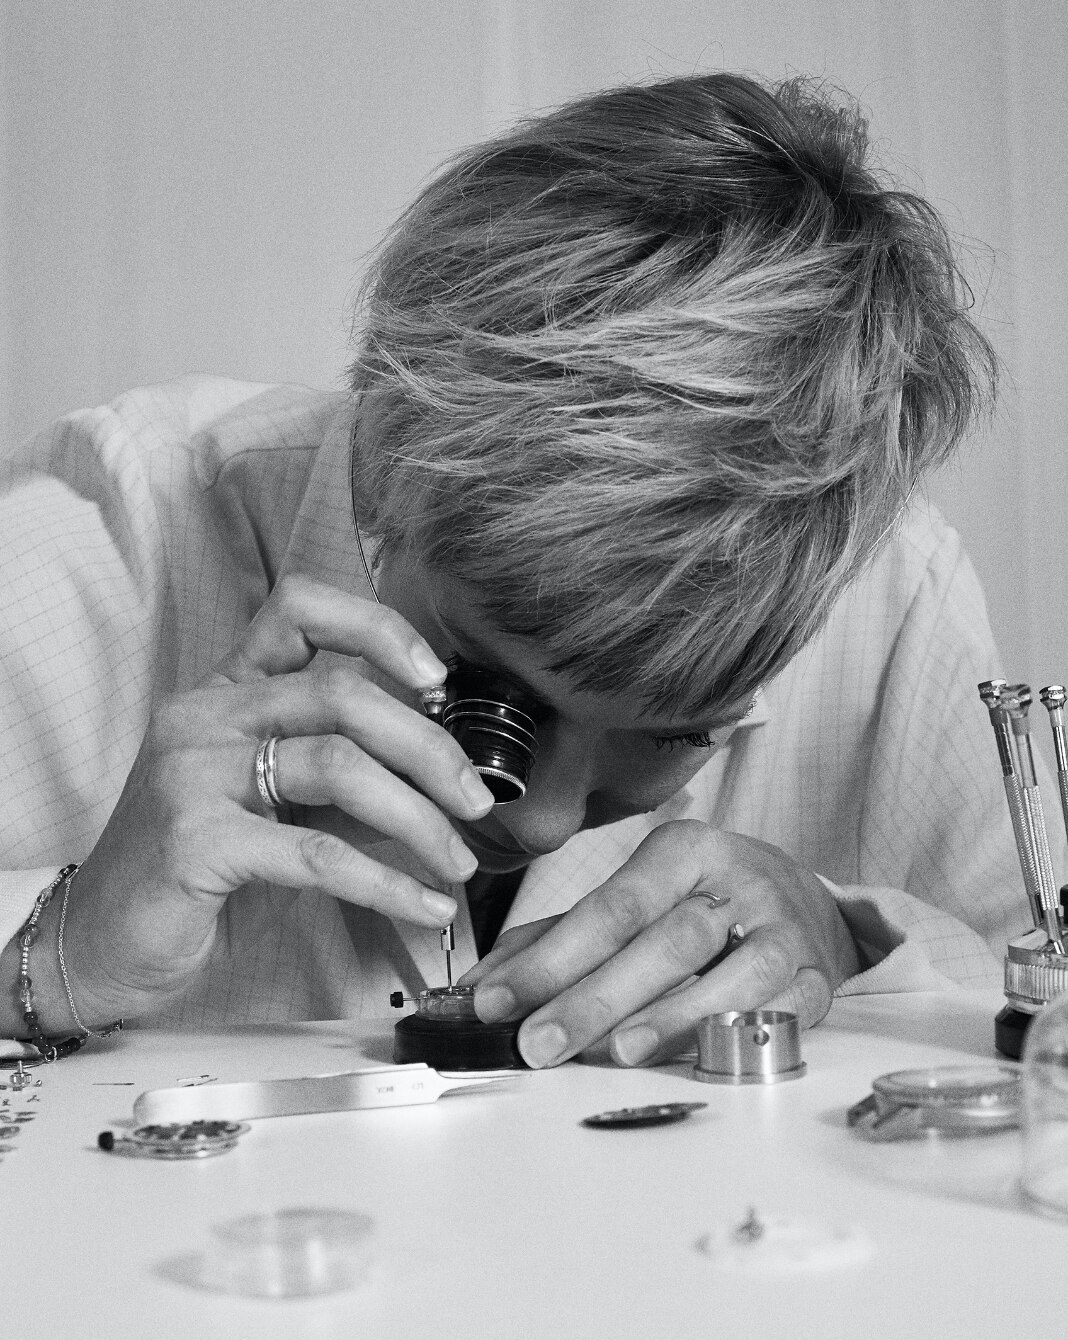 A watchmaker looking through an eyepiece as she works on a watch